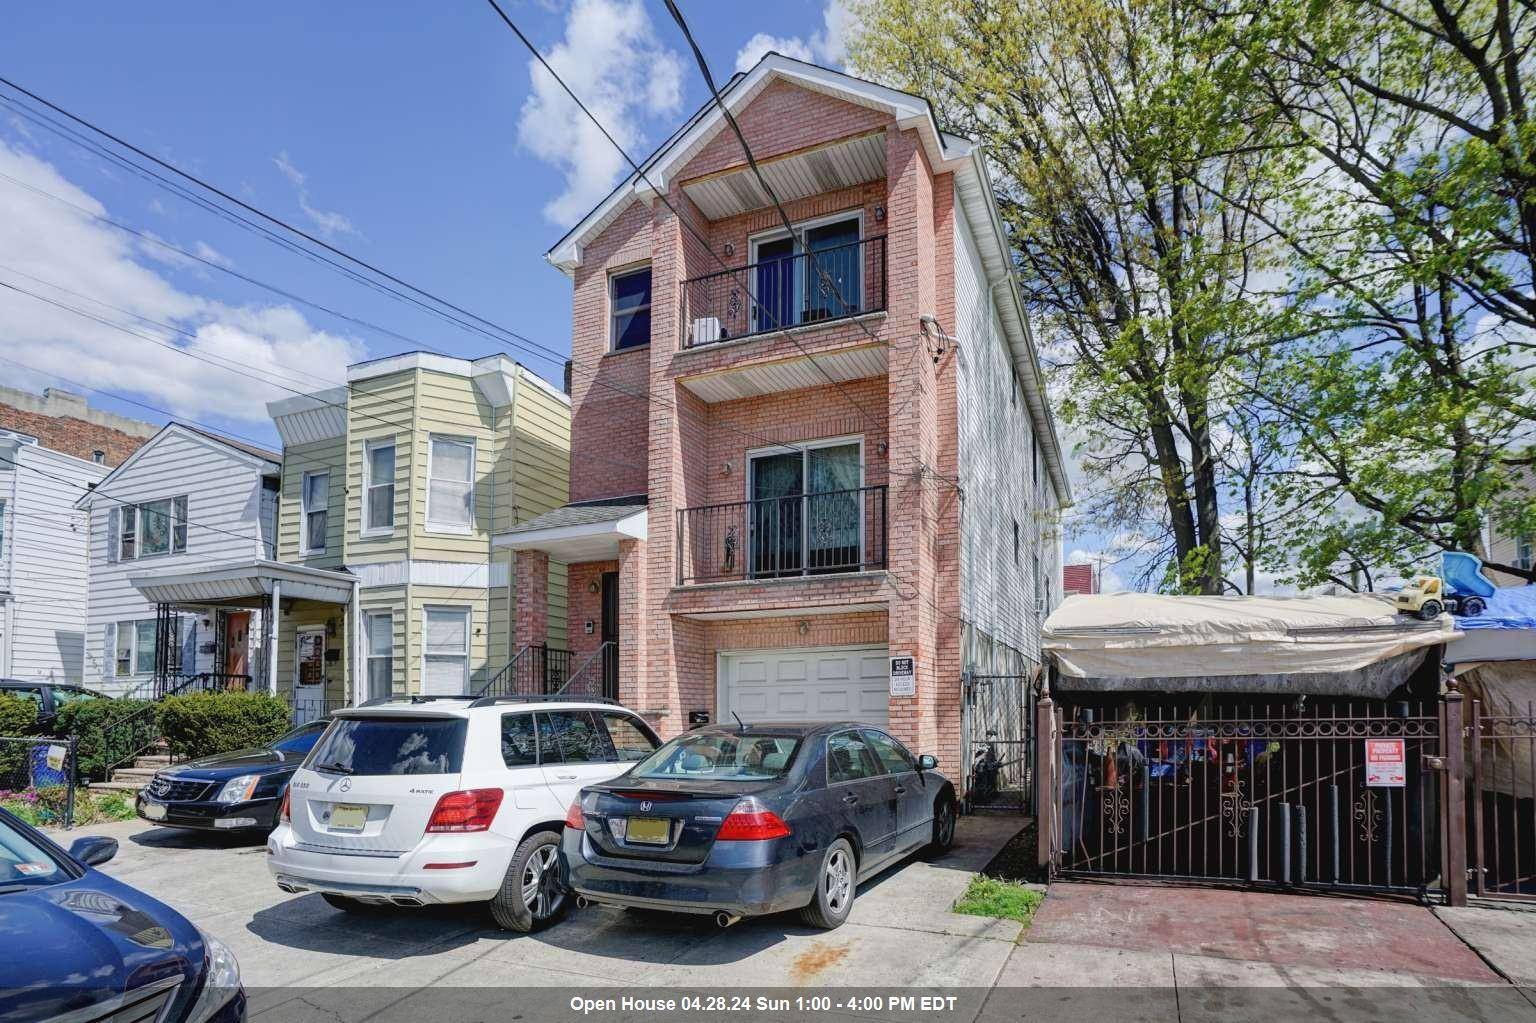 10 OLEAN AVE Multi-Family New Jersey